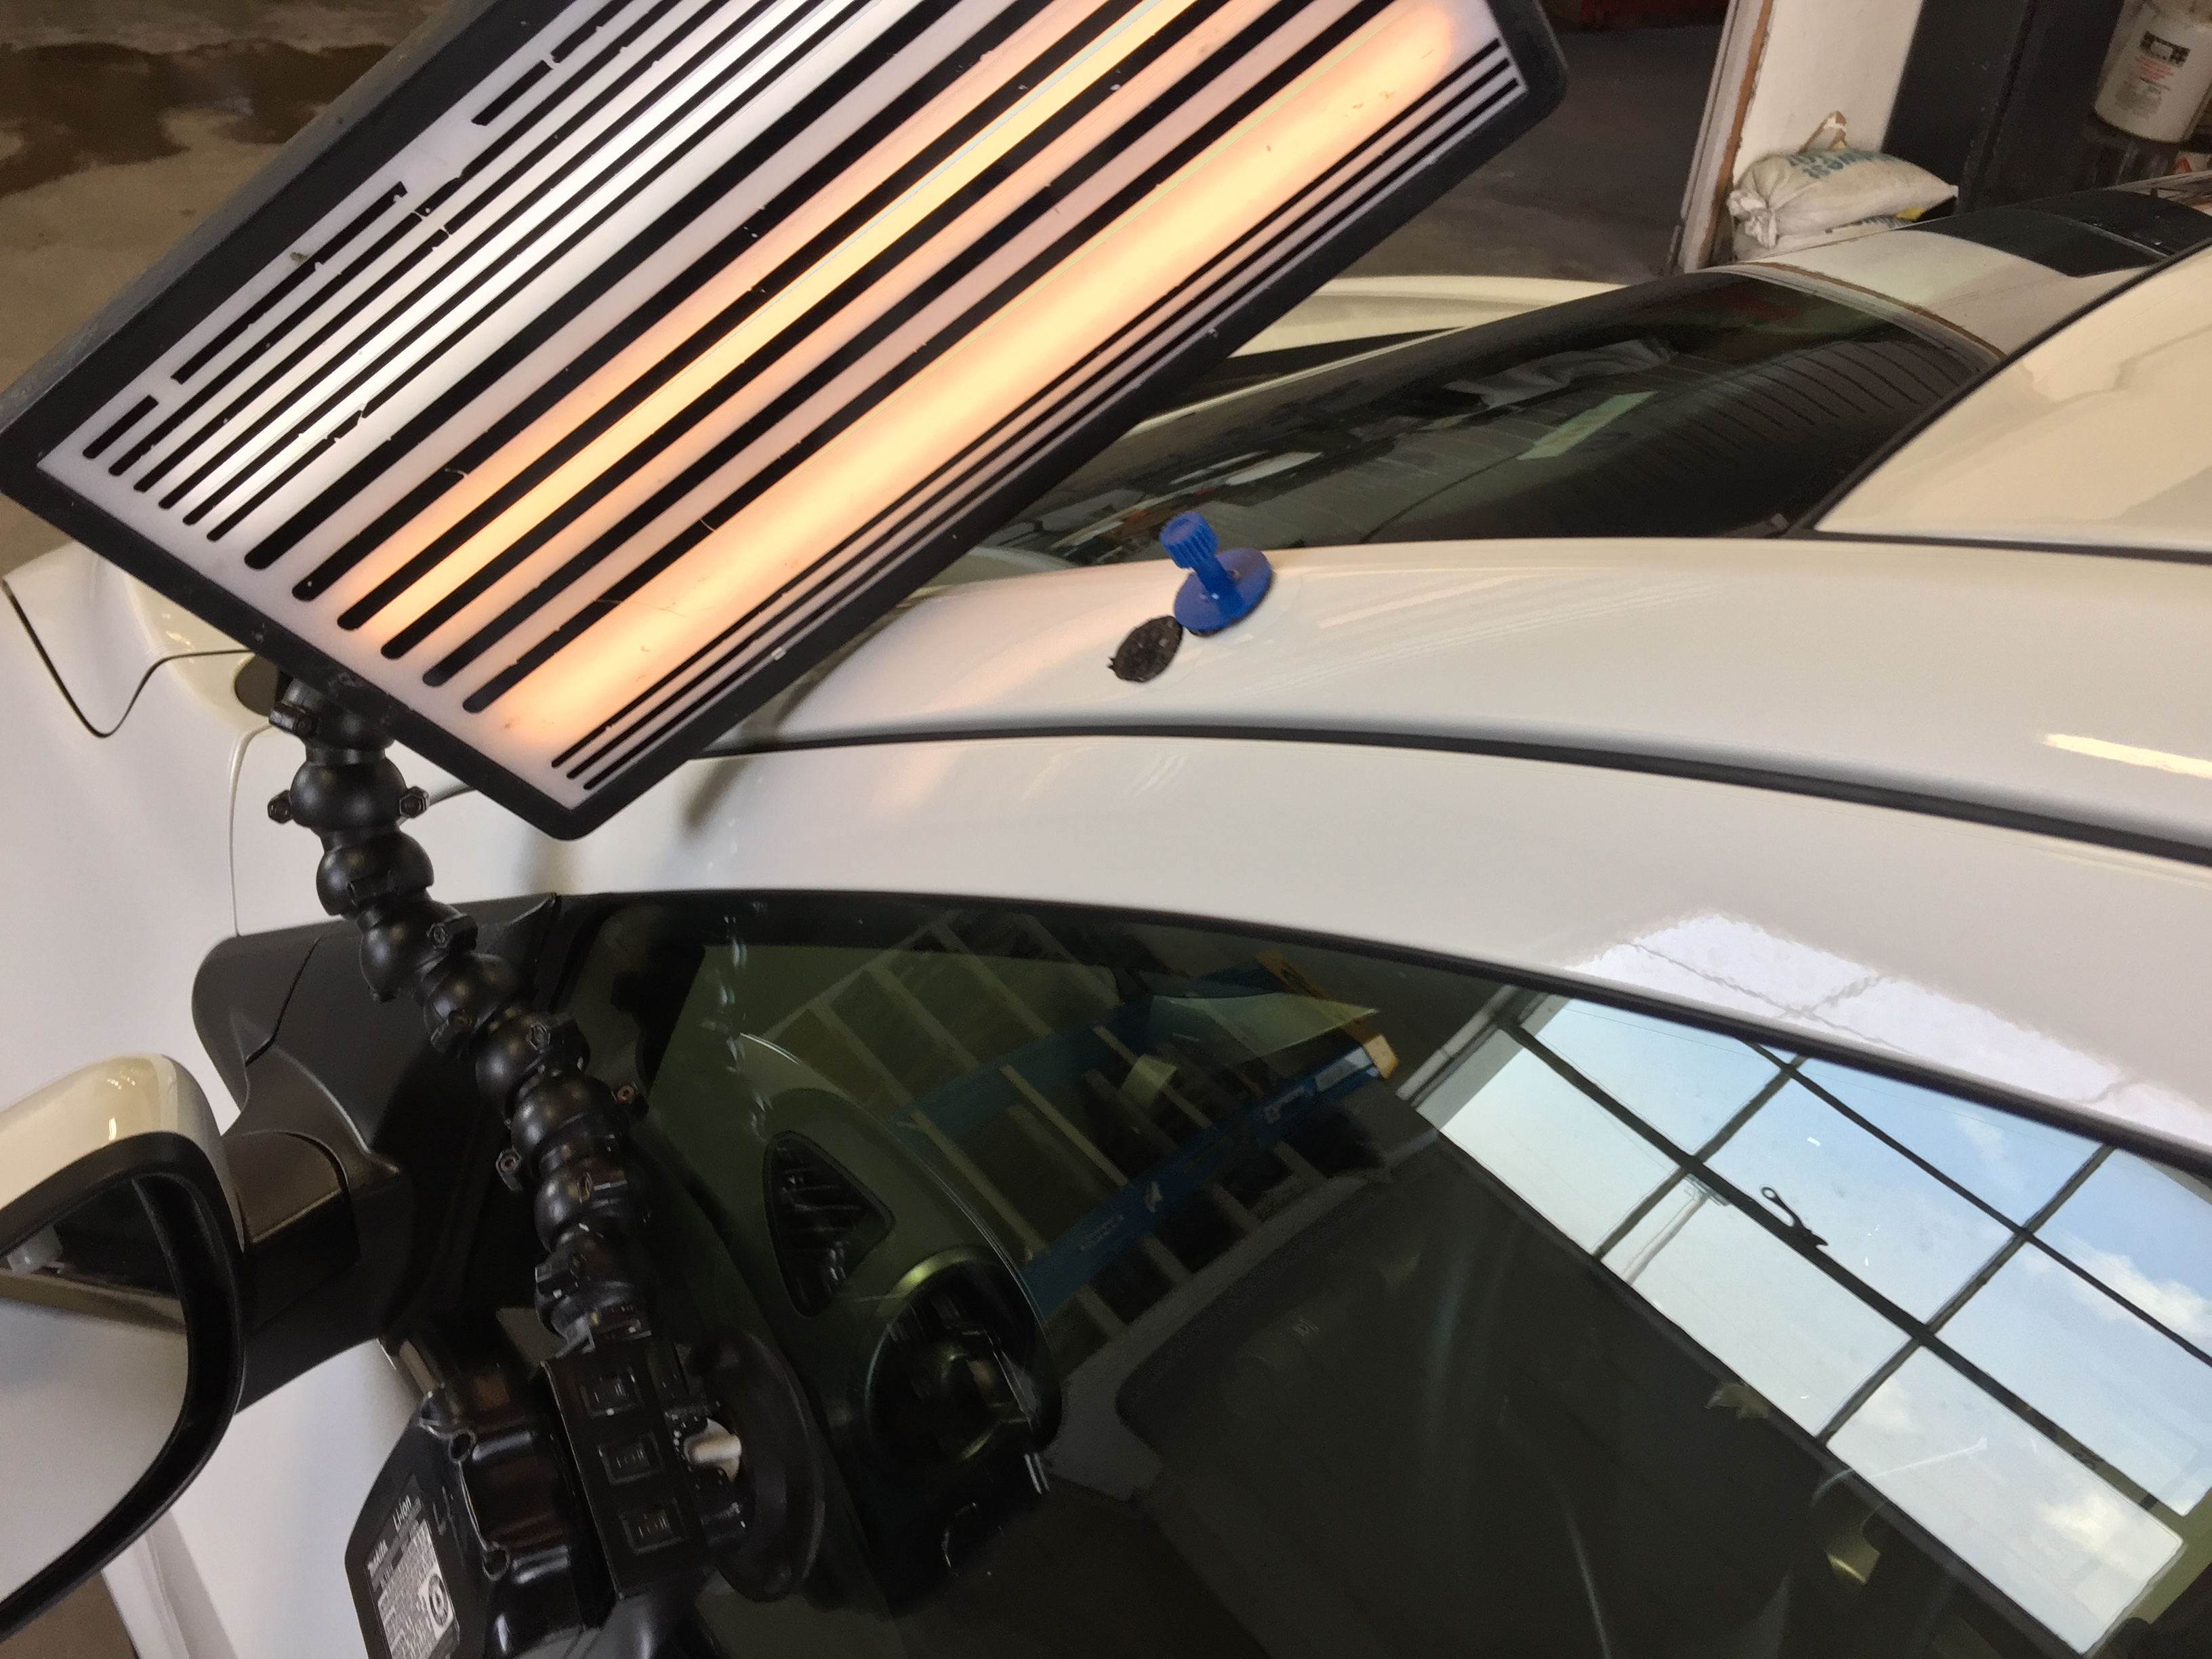 2015 Chevy Sonic, Dent Removal on PIllar, Images, Hail Damage, Paintless Dent Removal, Springfield, IL, https://217dent.com